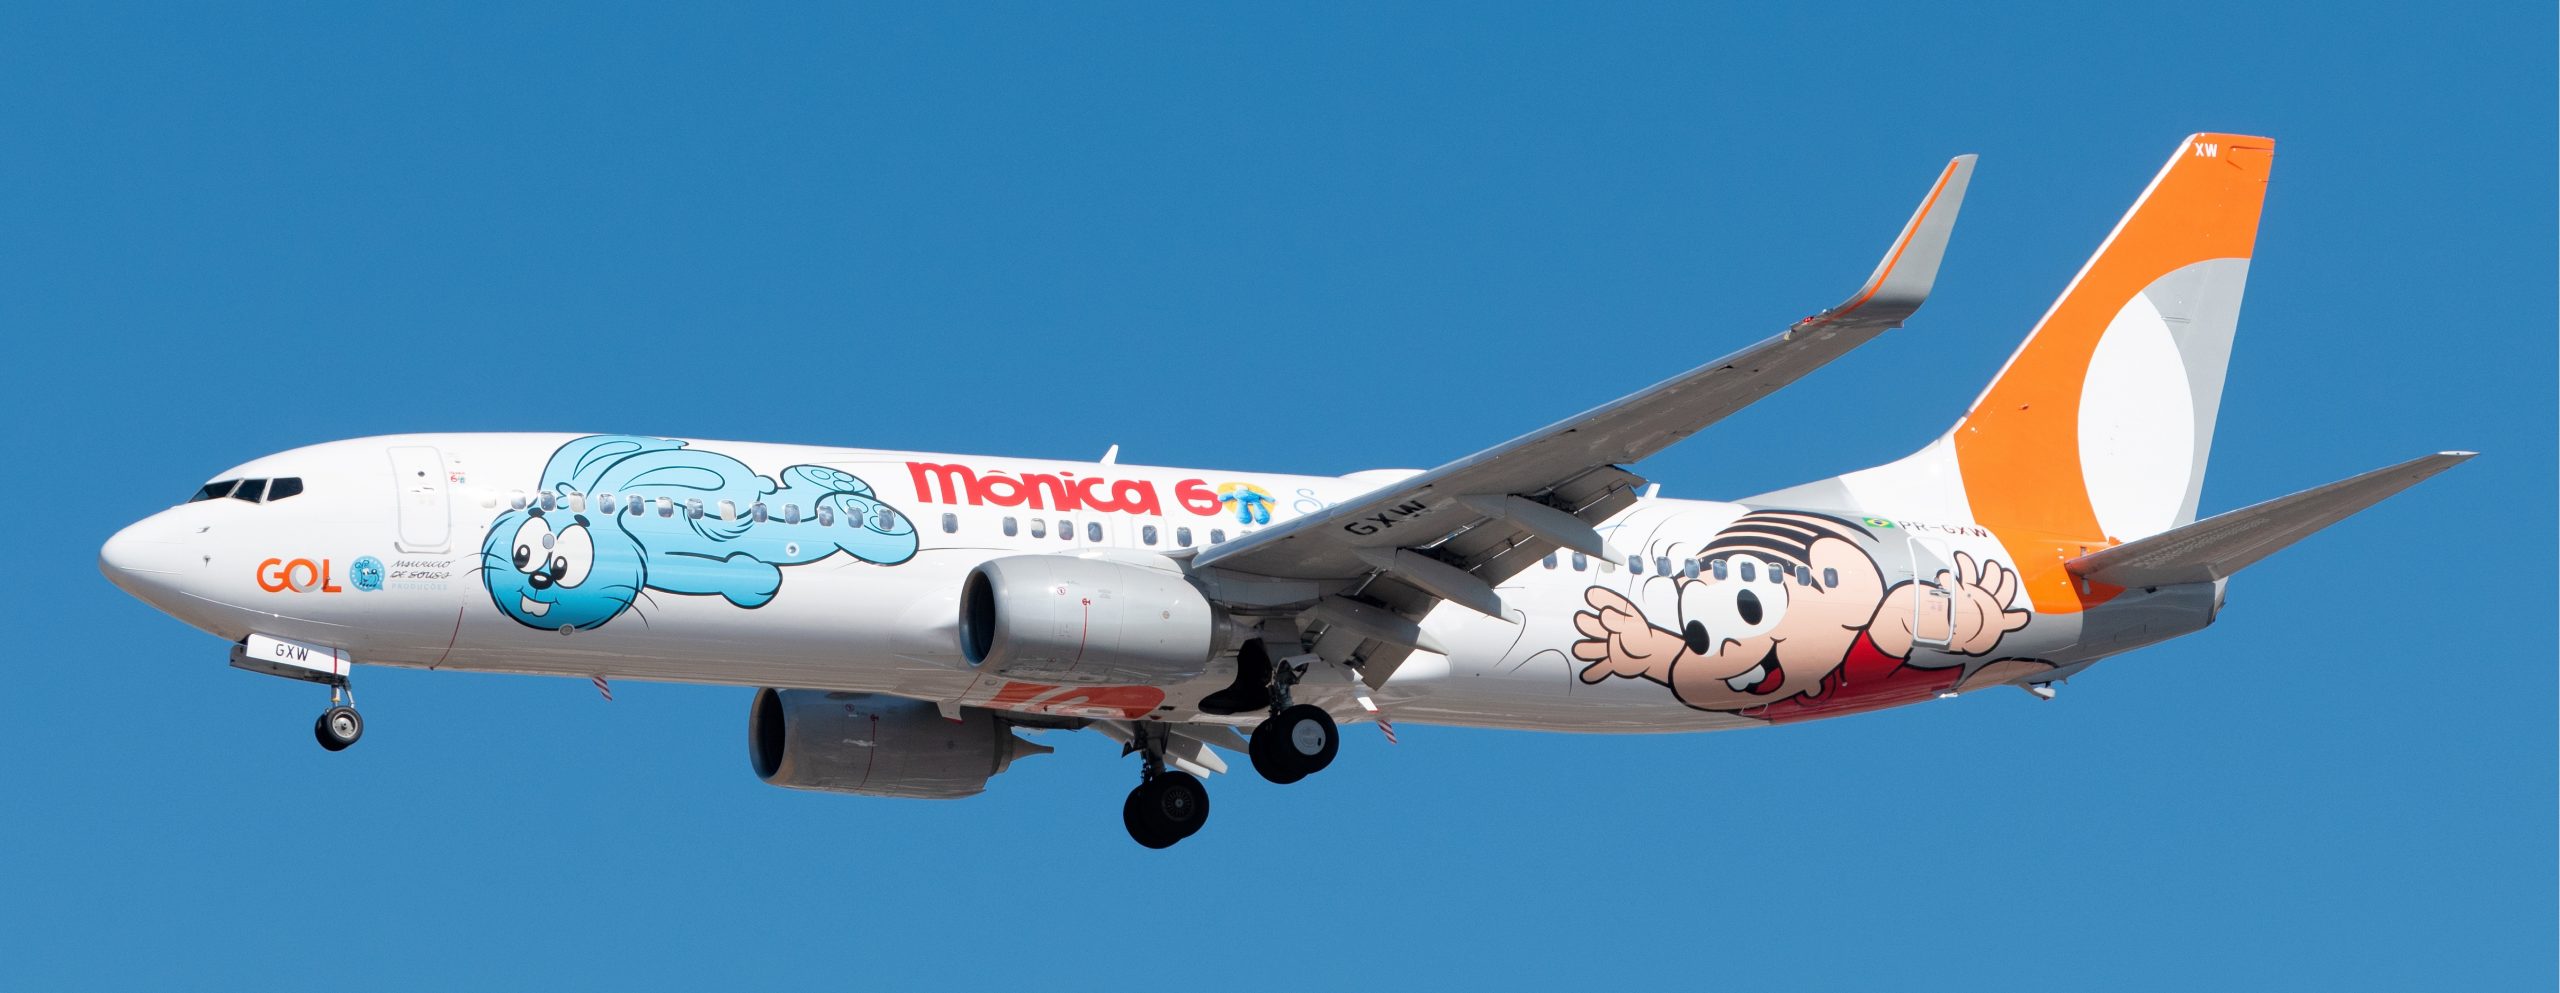 Illustration for: GOL reveals a special livery for Monica’s anniversary